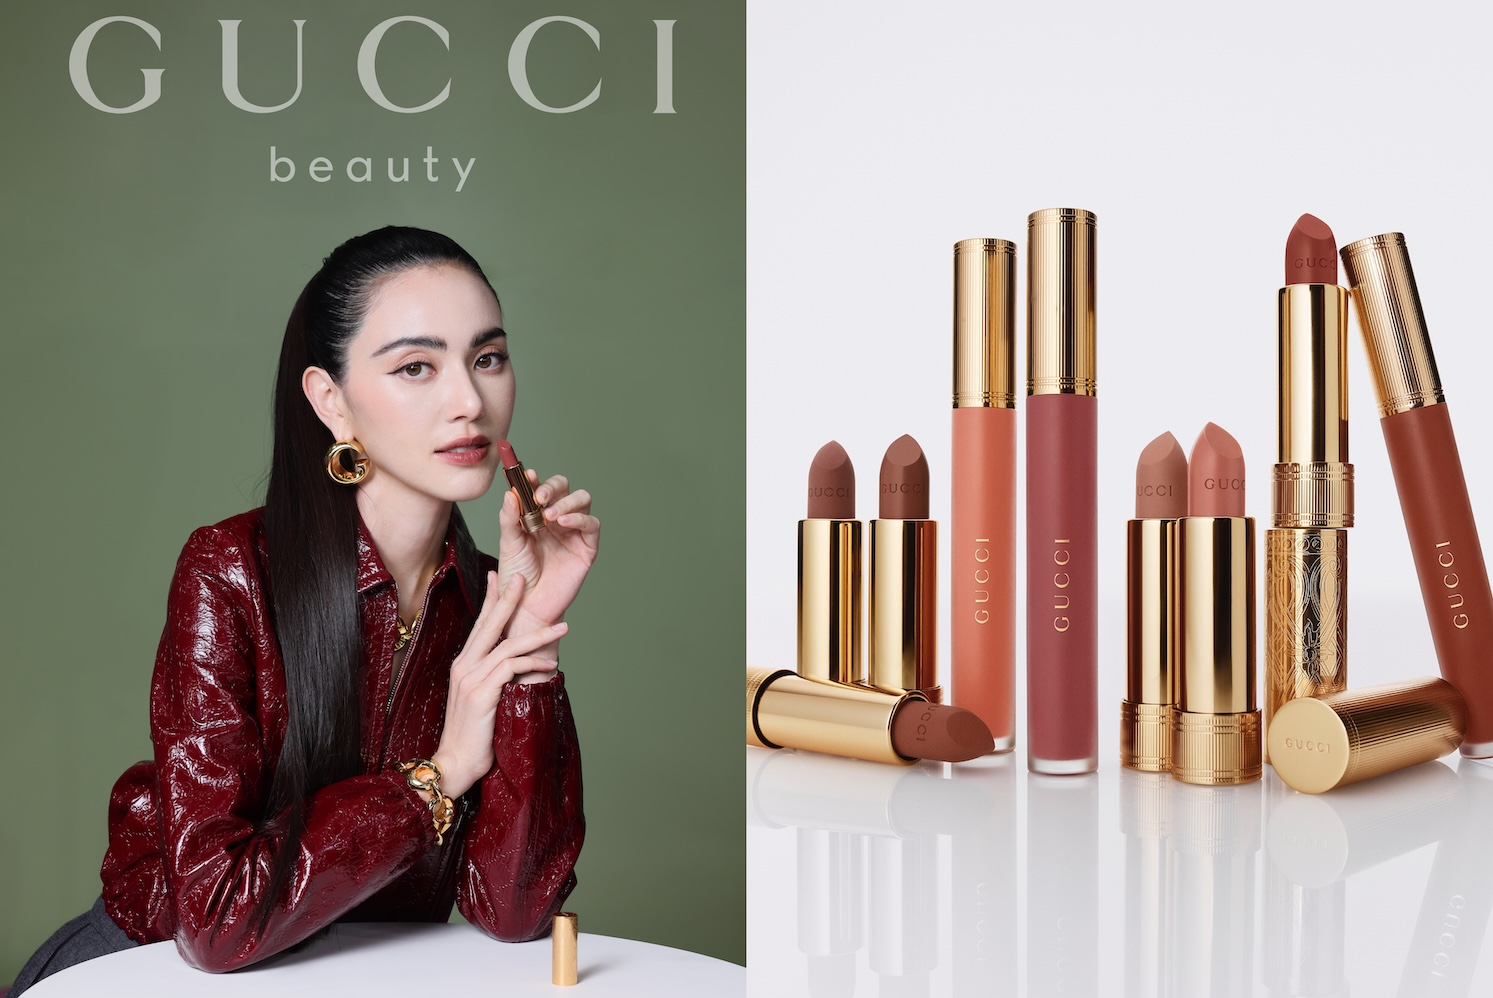 The Gucci Neutrals collection features 15 shades of nude lipstick